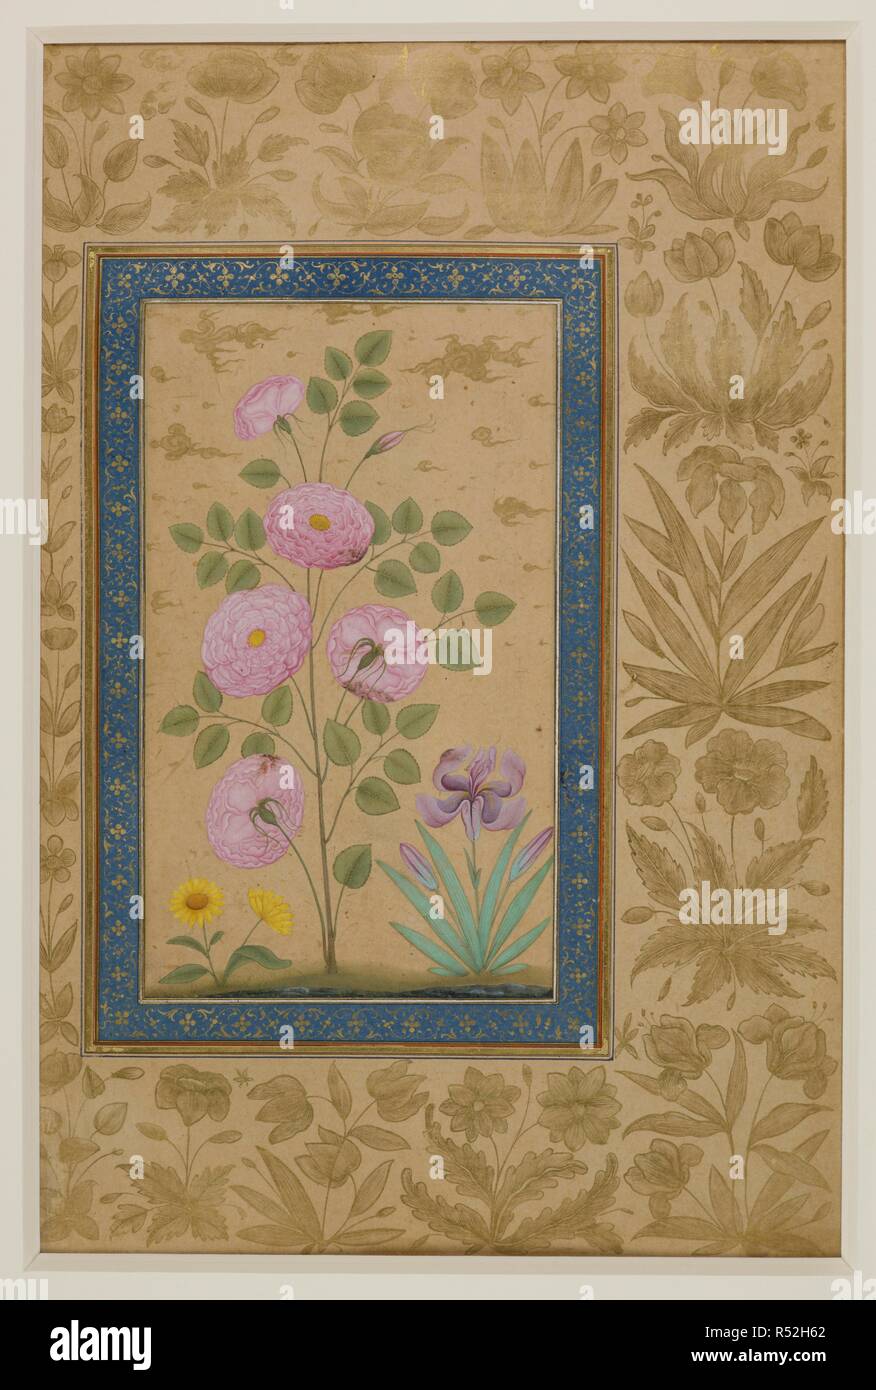 Rose, iris and daisy. Dara Shikoh. 1630-1640. A pink rose, a blue iris and a yellow daisy, growing beside water; gold clouds at top. Opaque watercolour with gold, background not coloured.  Image taken from Dara Shikoh.  Originally published/produced in 1630-1640. . Source: Add.Or.3129, f.63v. Stock Photo